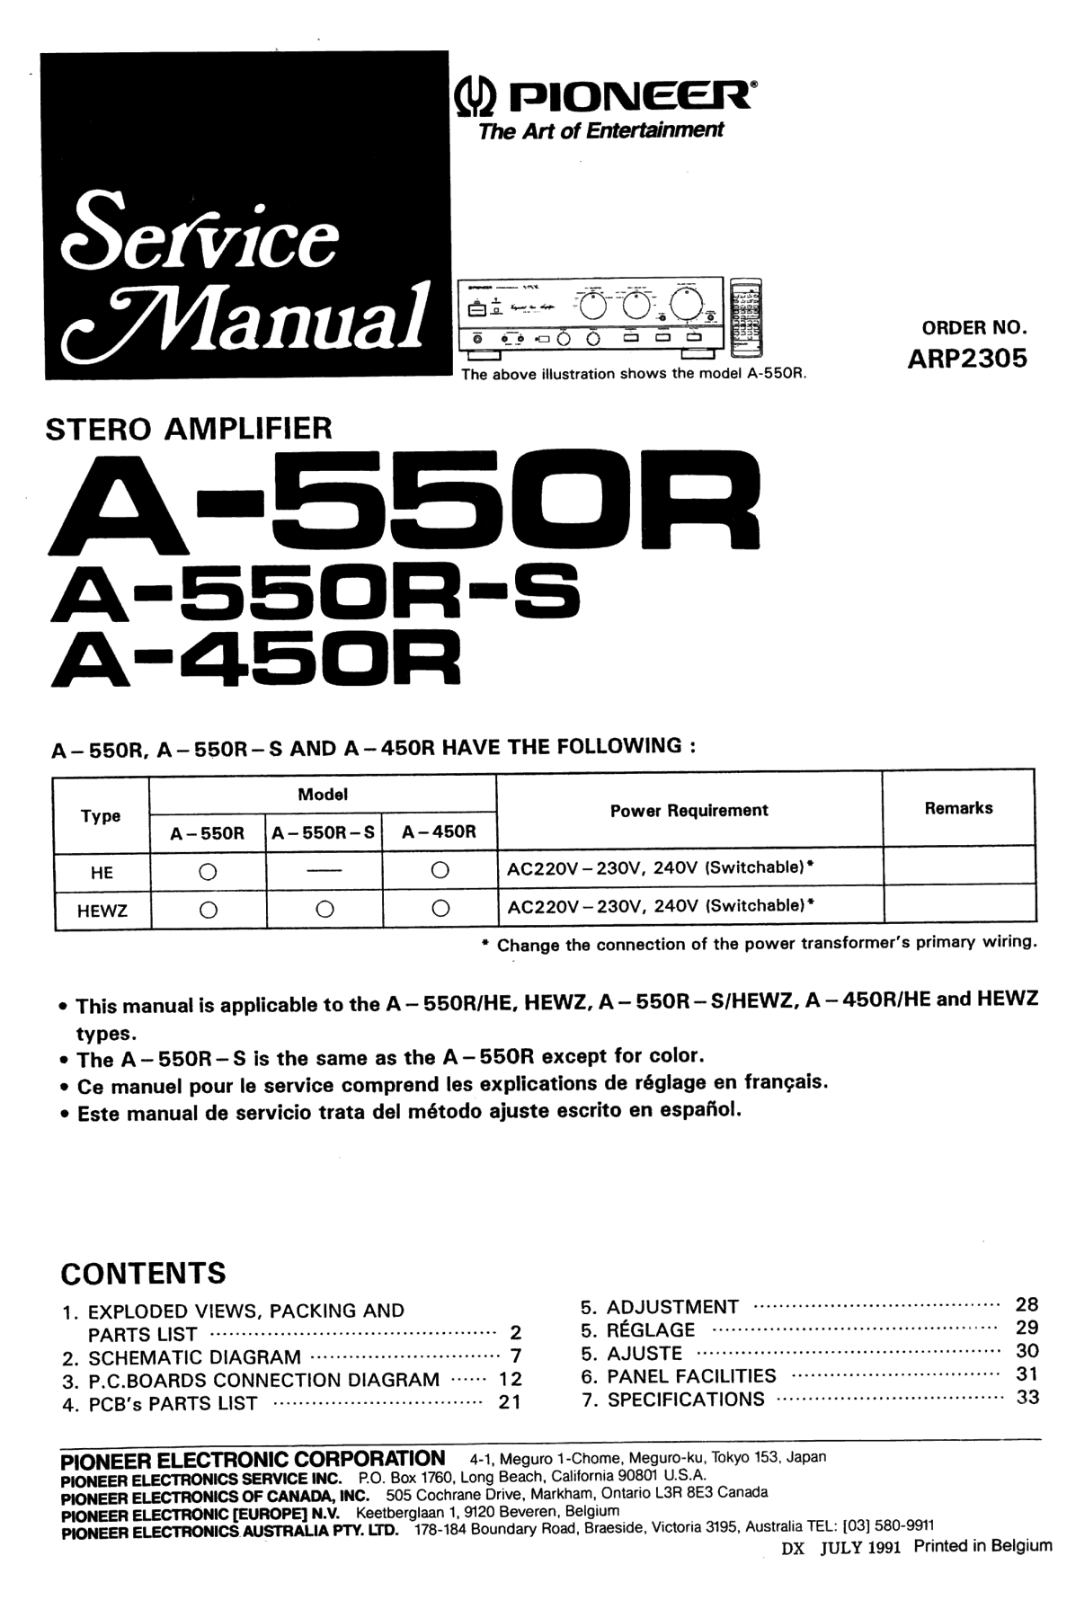 Pioneer A-450, A-550-RS, A-550-R Service manual